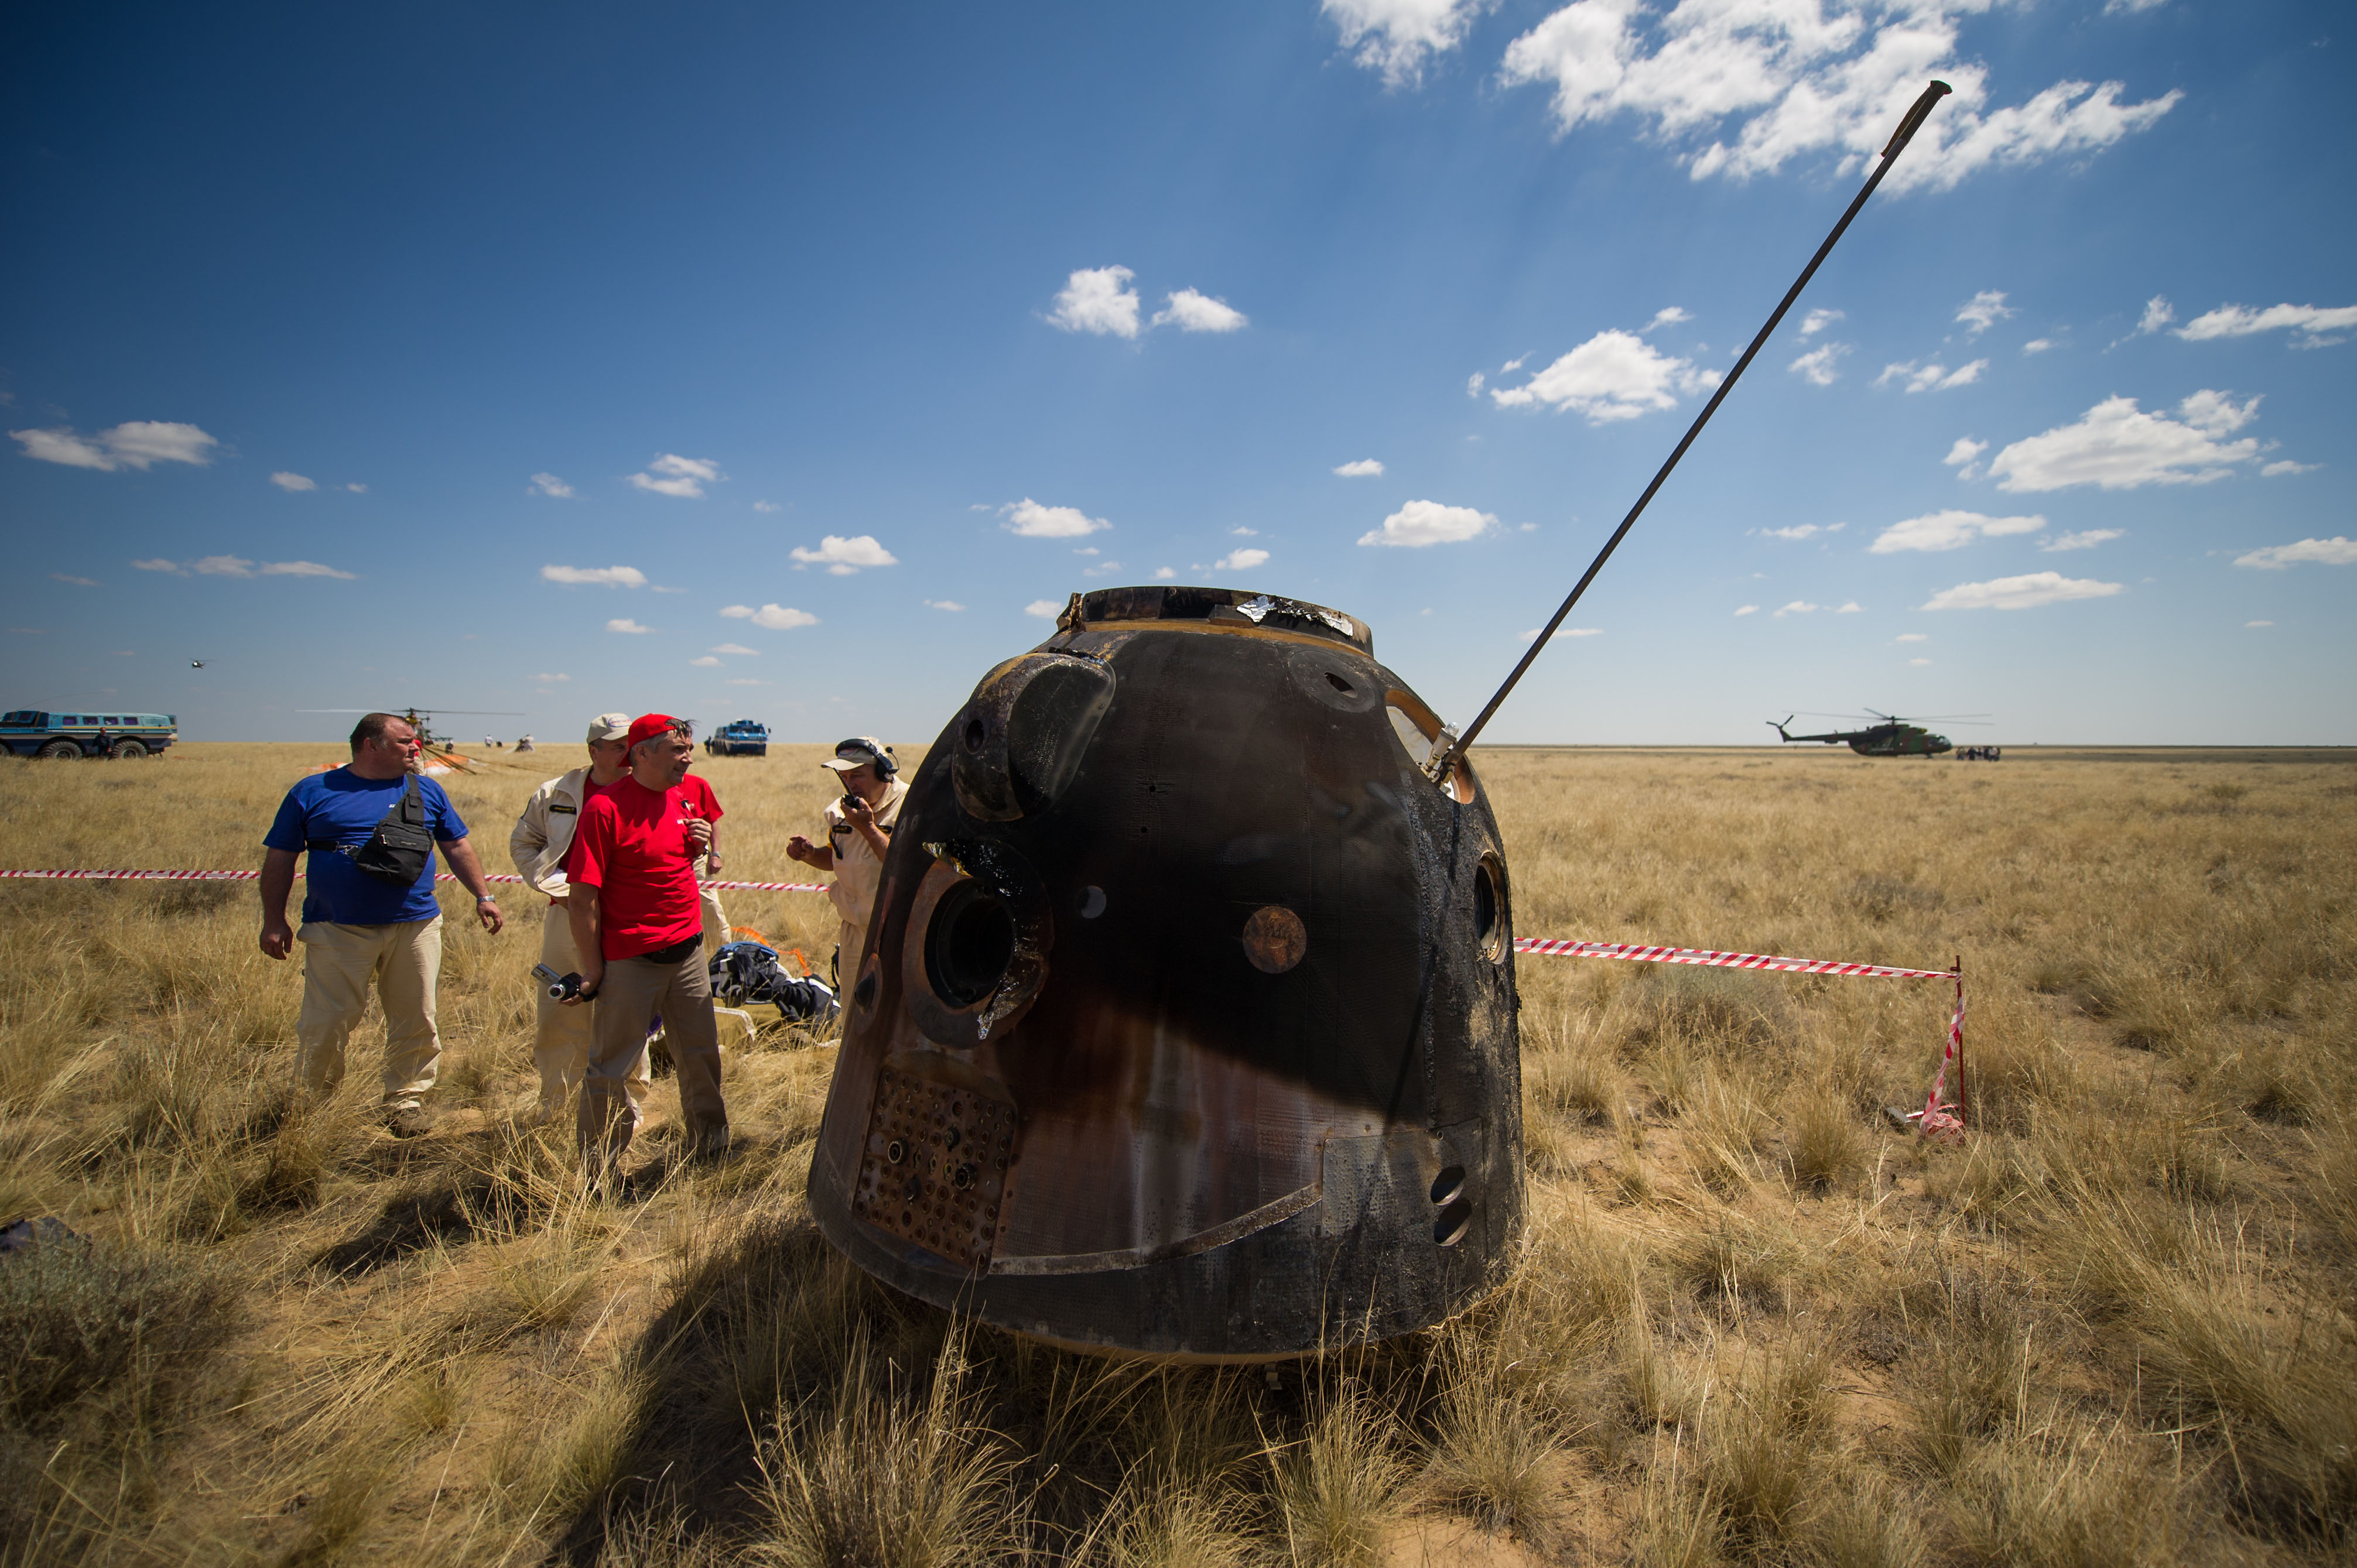 Expedition 31 Landing